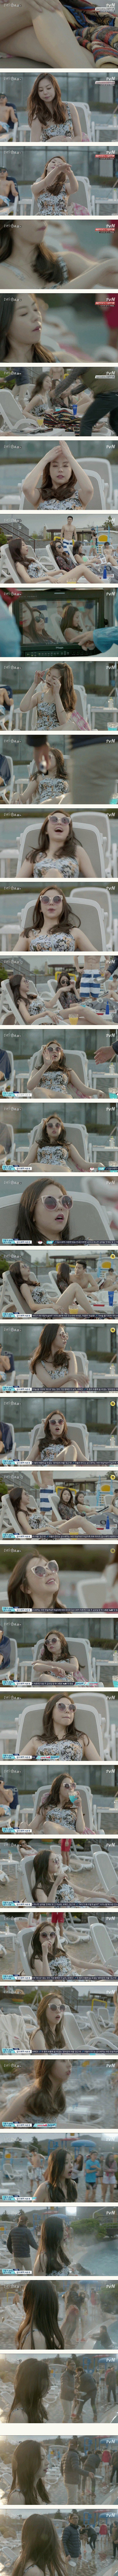 episodes 1 and 2 captures for the Korean drama 'Heart to Heart'